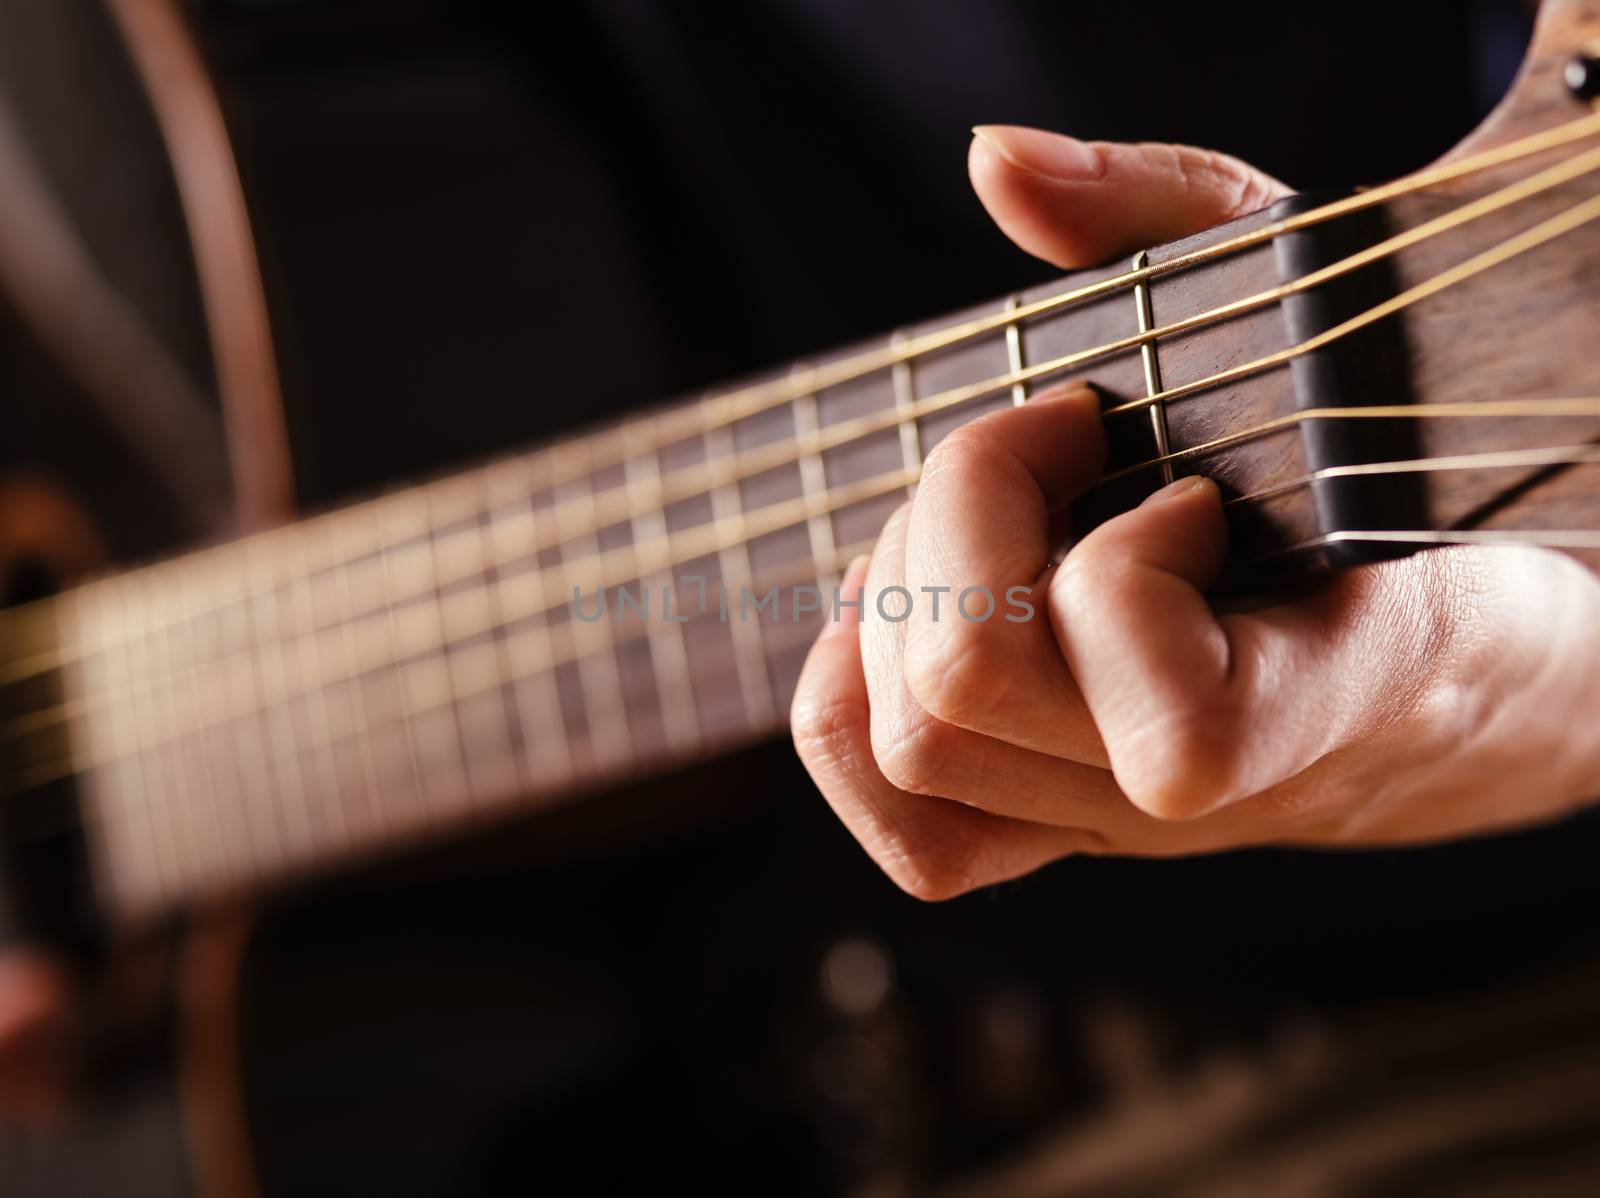 Photo of a woman playing an acoustic guitar with extreme shallow depth of field with focus on hand and headstock.